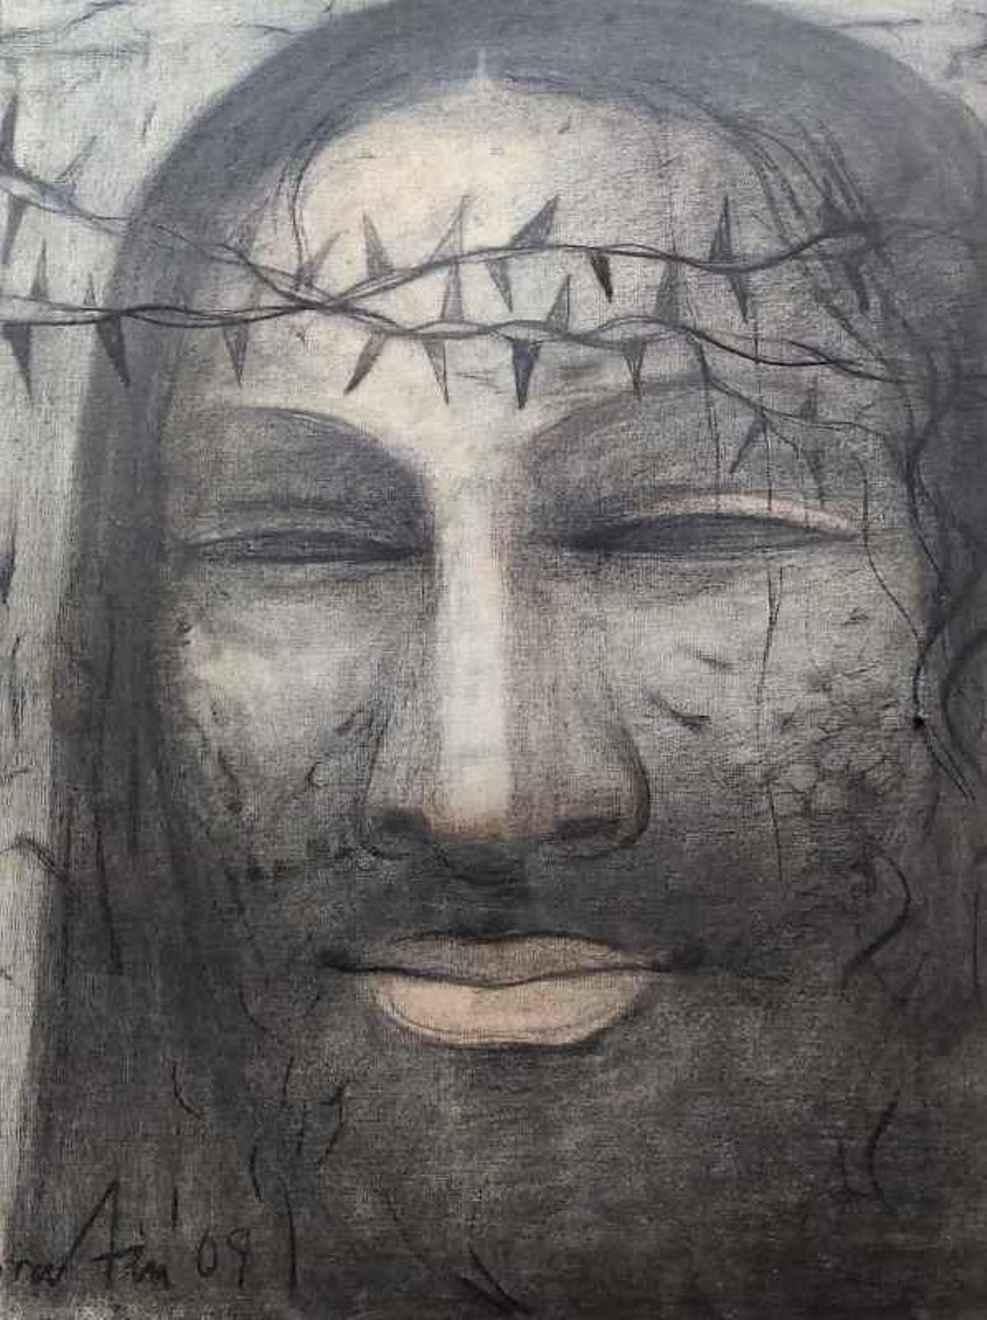 Christ, Charcoal & Pastel on Canvas, Black by Contemporary Artist "In Stock"